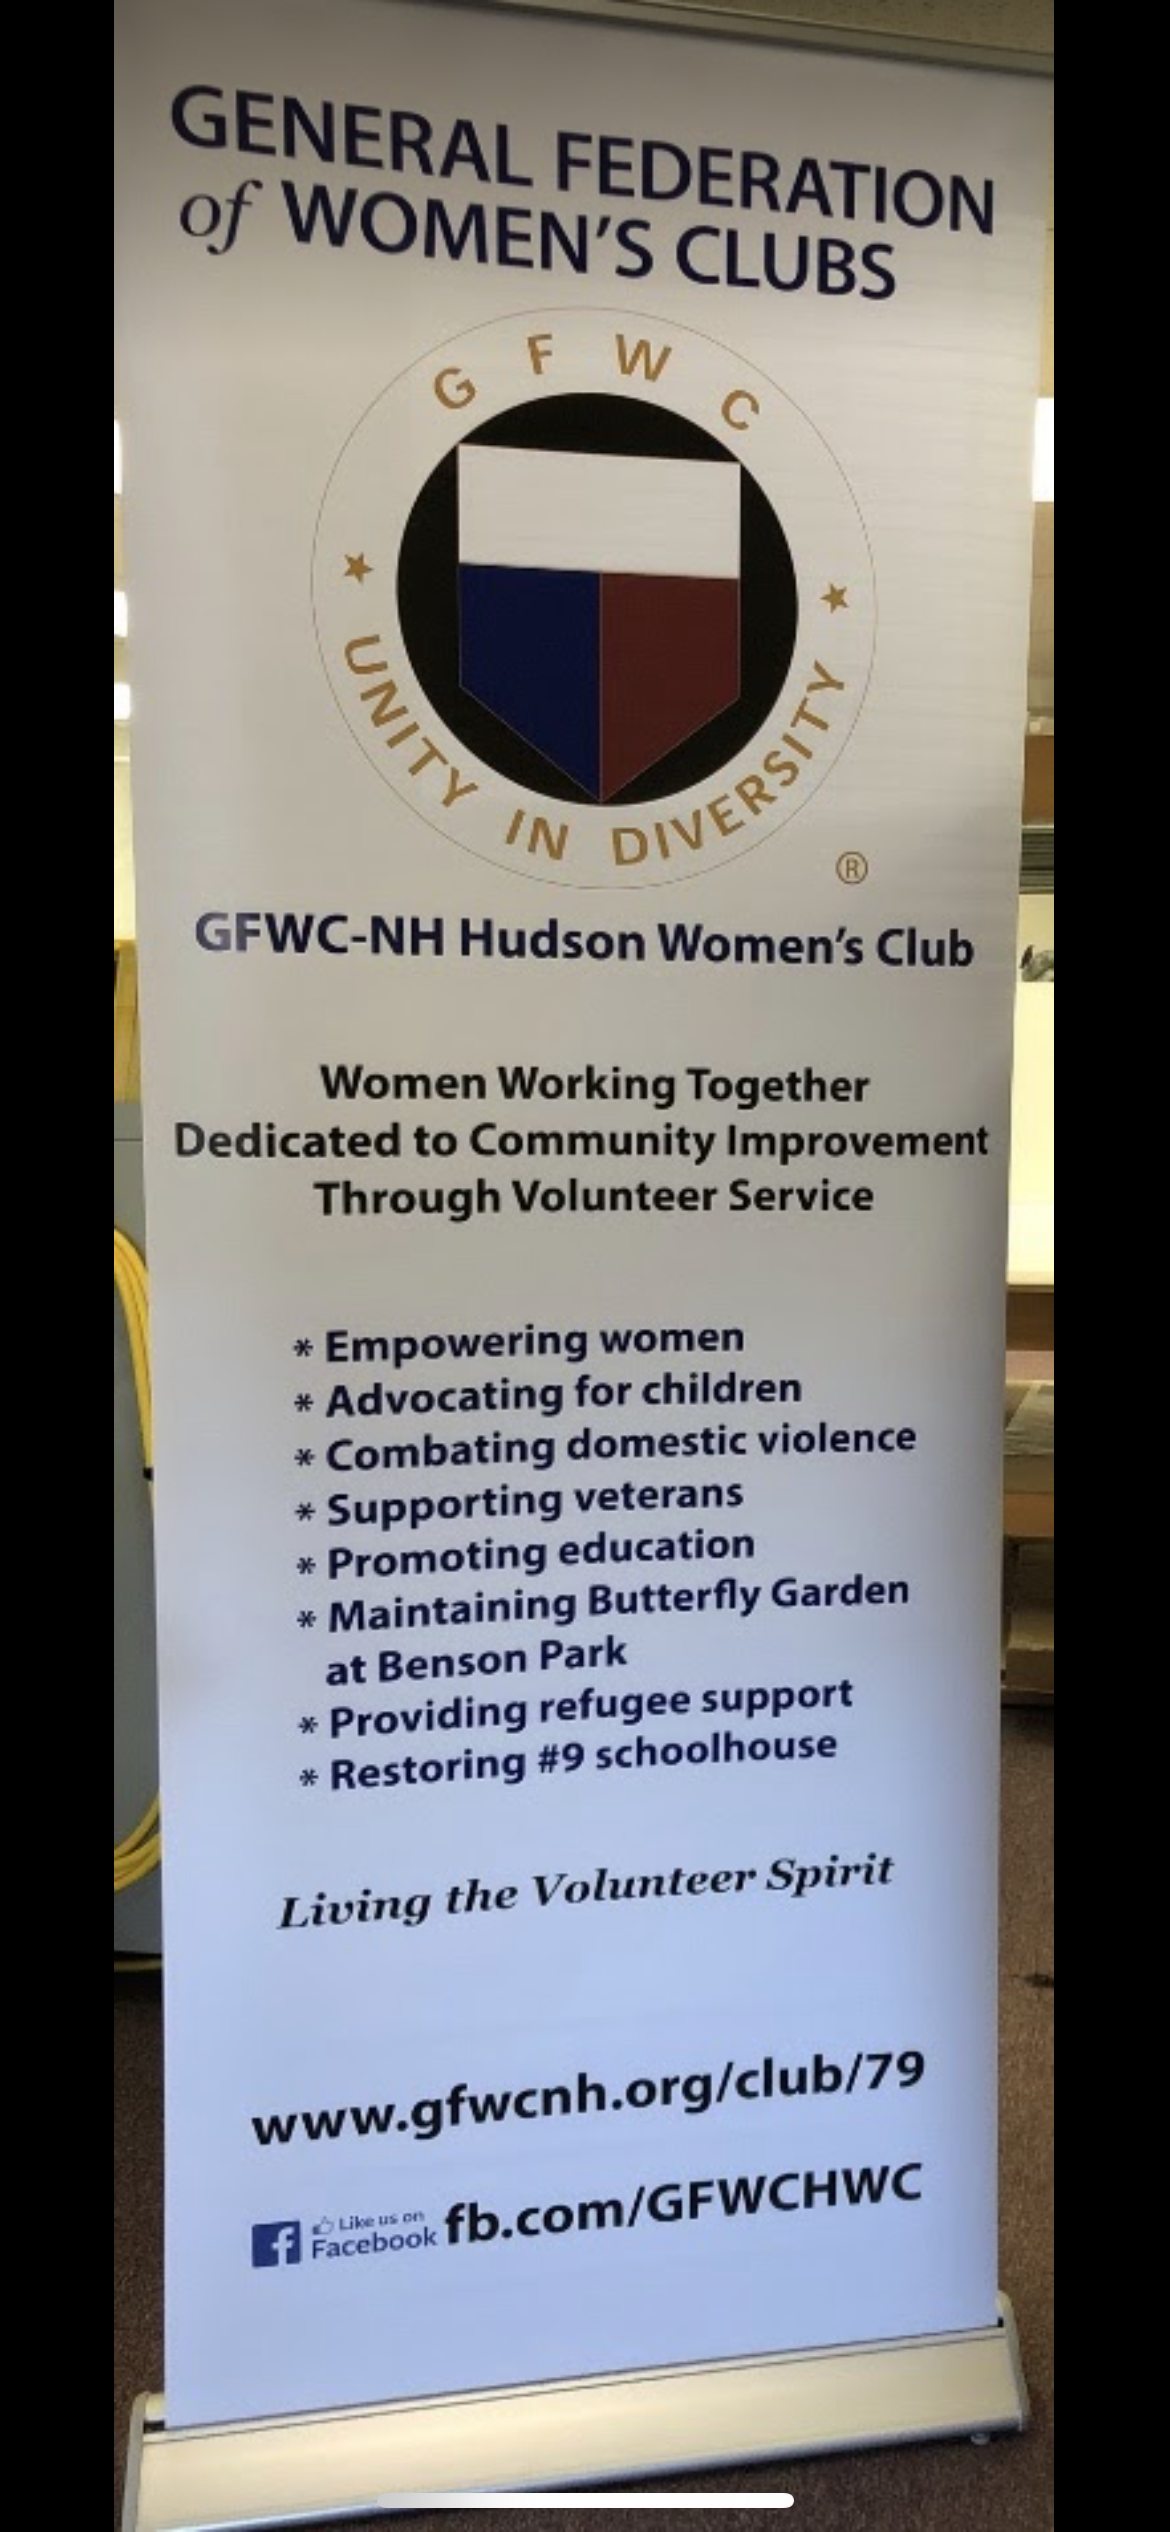 Picture of our club stand up banner which has the GFWC logo and lists activities we do